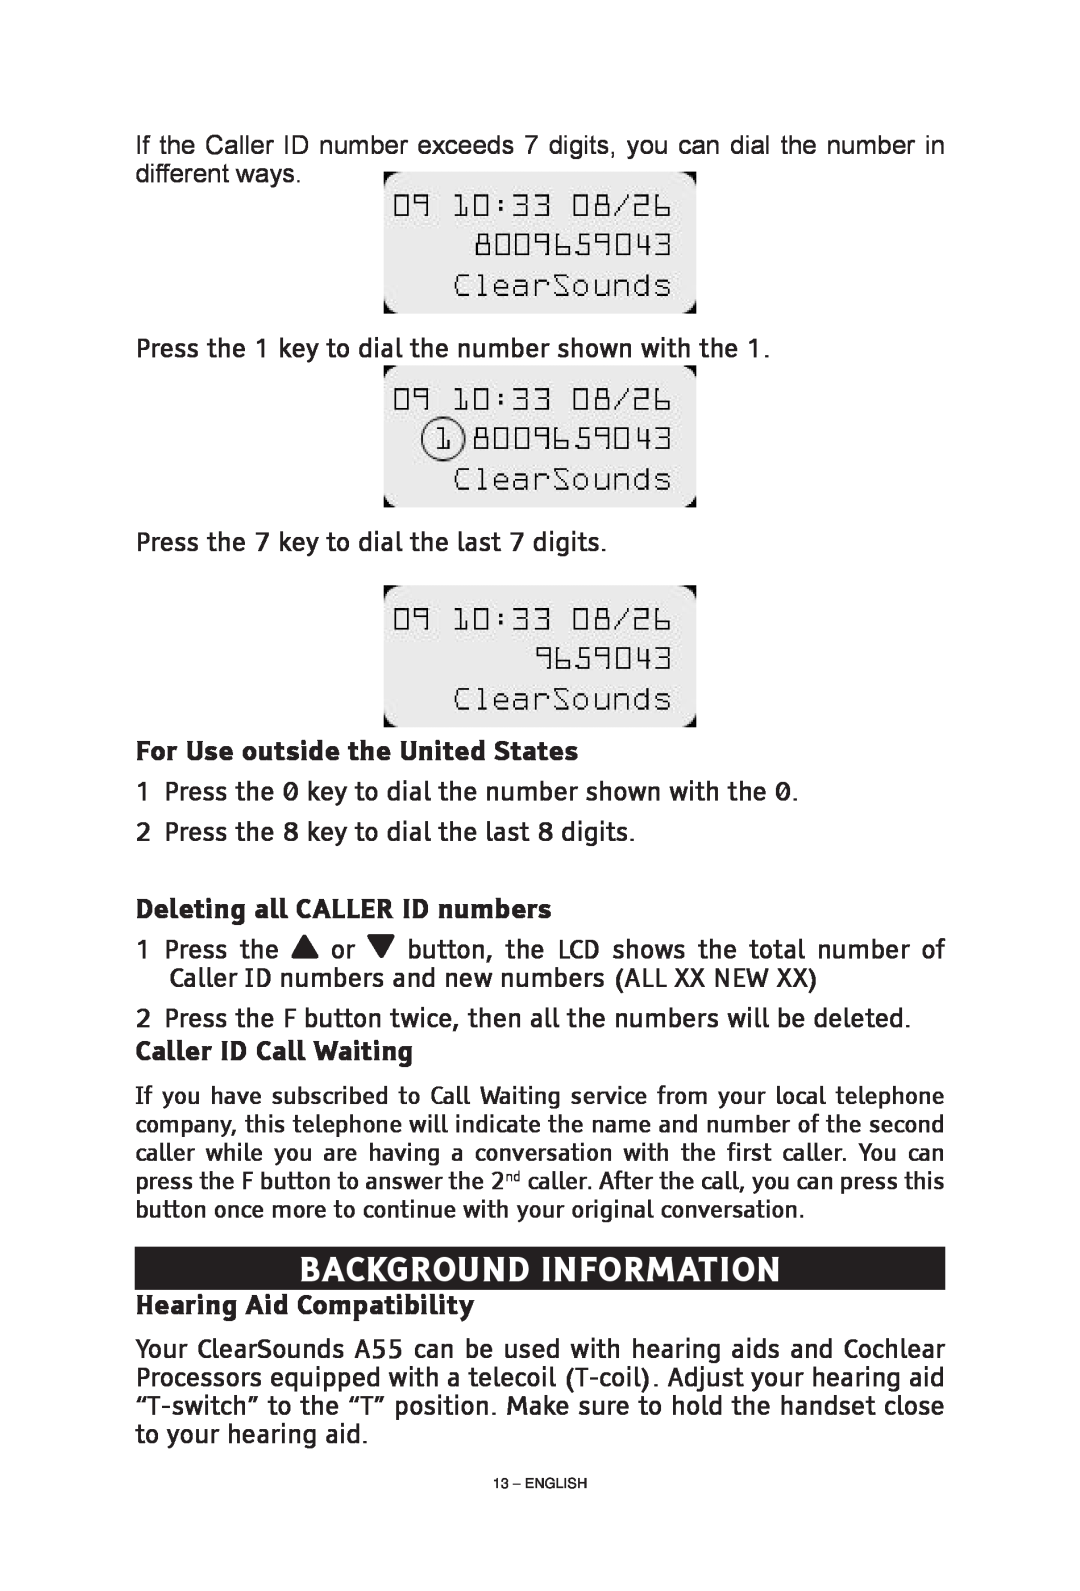 ClearSounds CS-A55 manual Background Information, For Use outside the United States, Deleting all CALLER ID numbers 